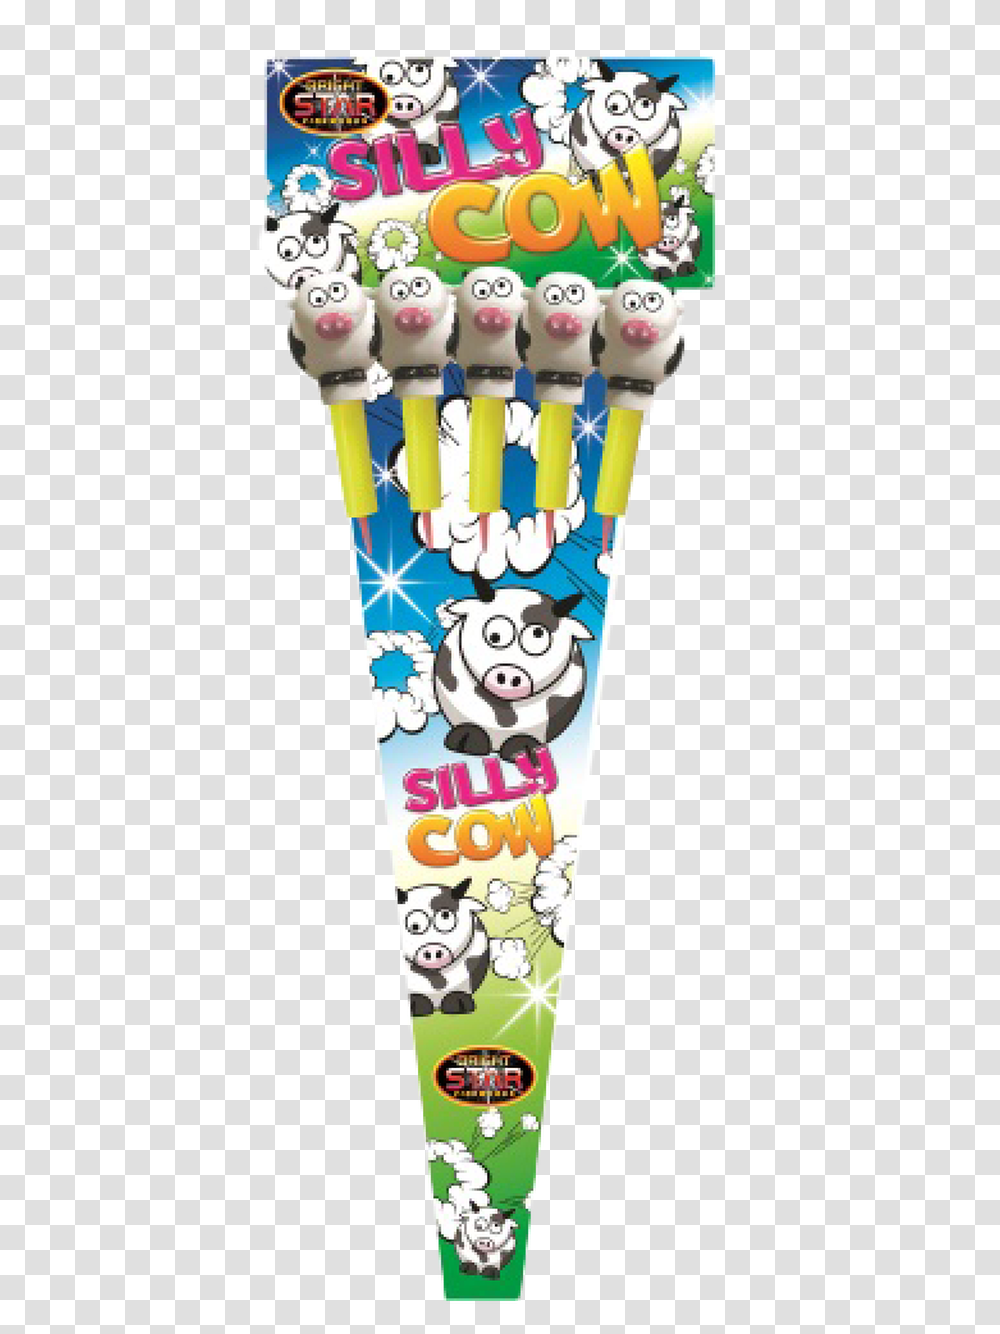 Silly Cow Rocket Pack Silly Cow Rockets, Skateboard, Sport, Sports, Outdoors Transparent Png